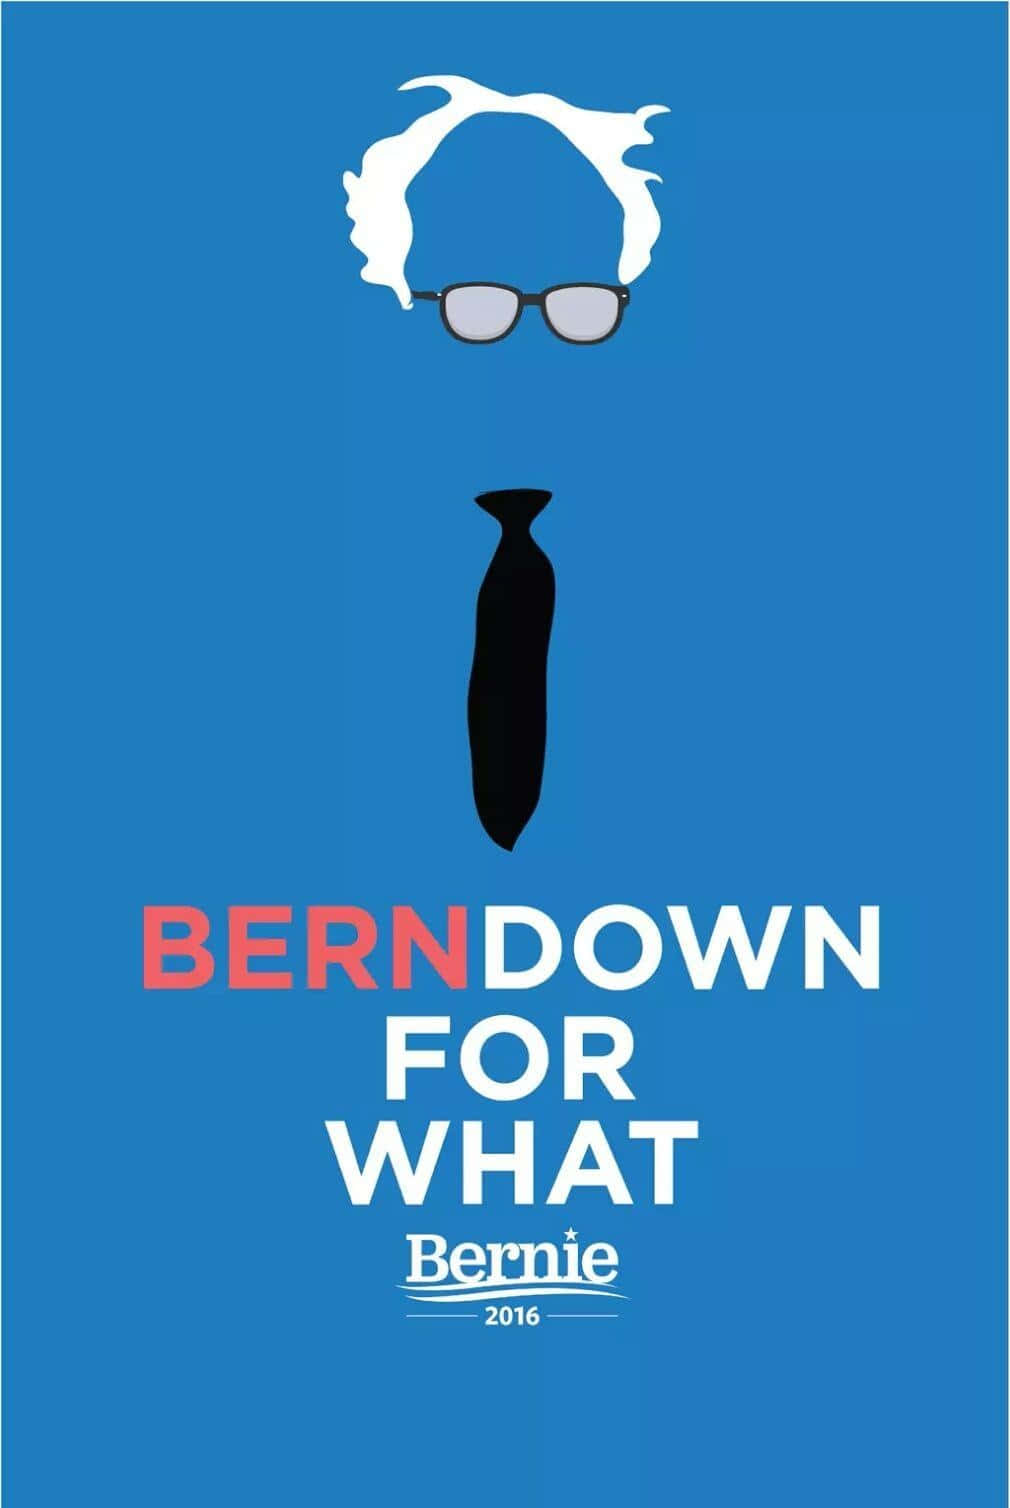 Bern Down For What Bernie Sanders2016 Campaign Poster Wallpaper